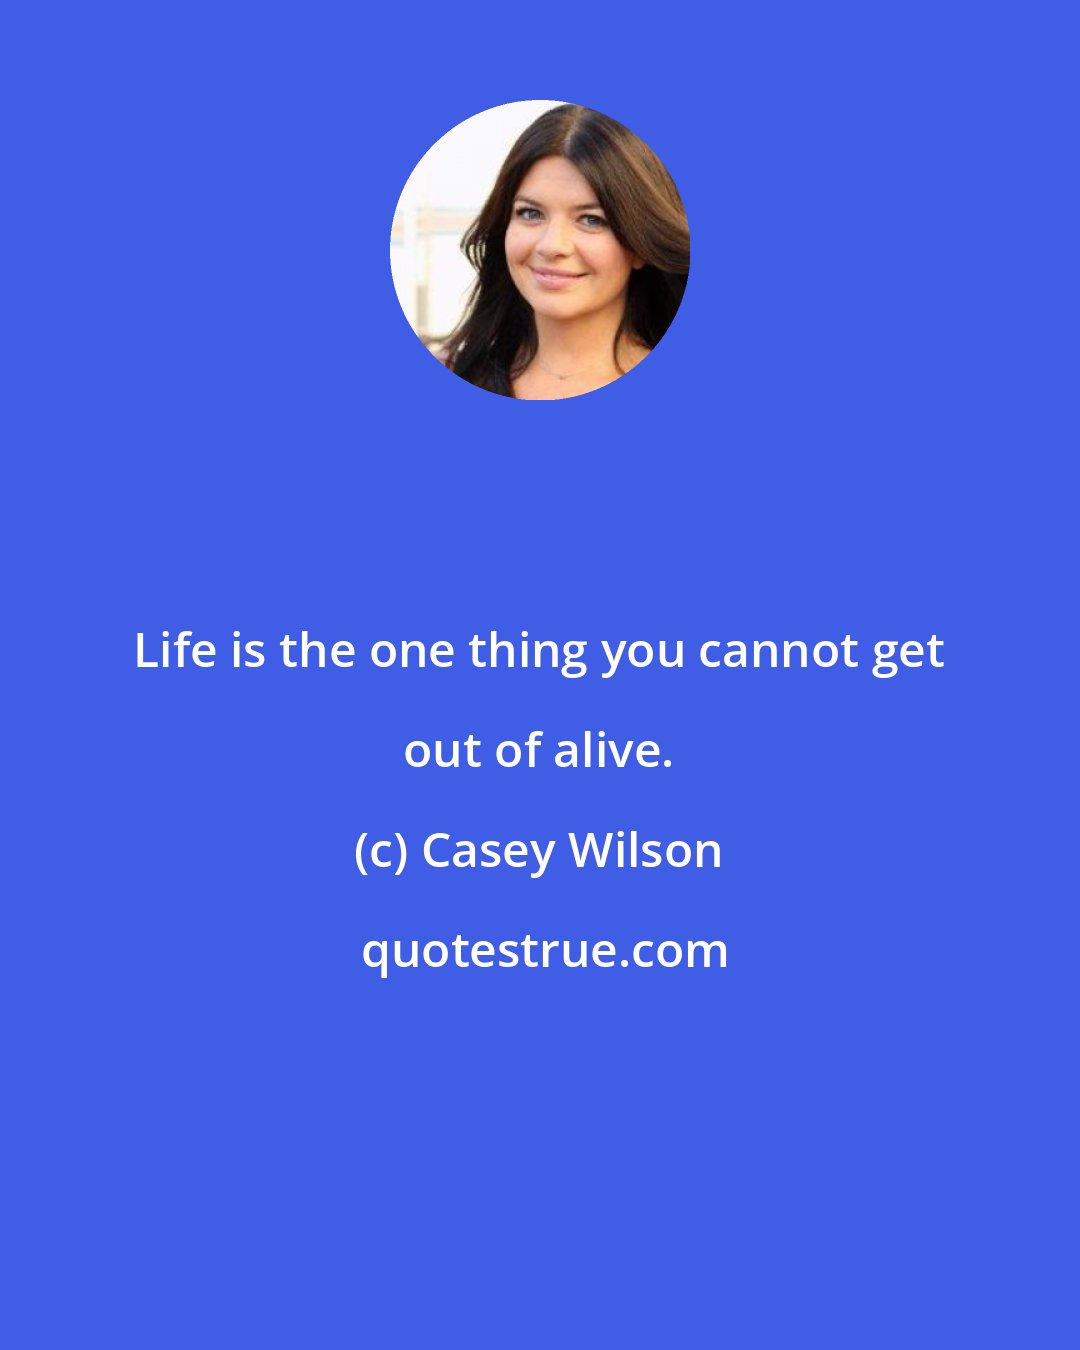 Casey Wilson: Life is the one thing you cannot get out of alive.